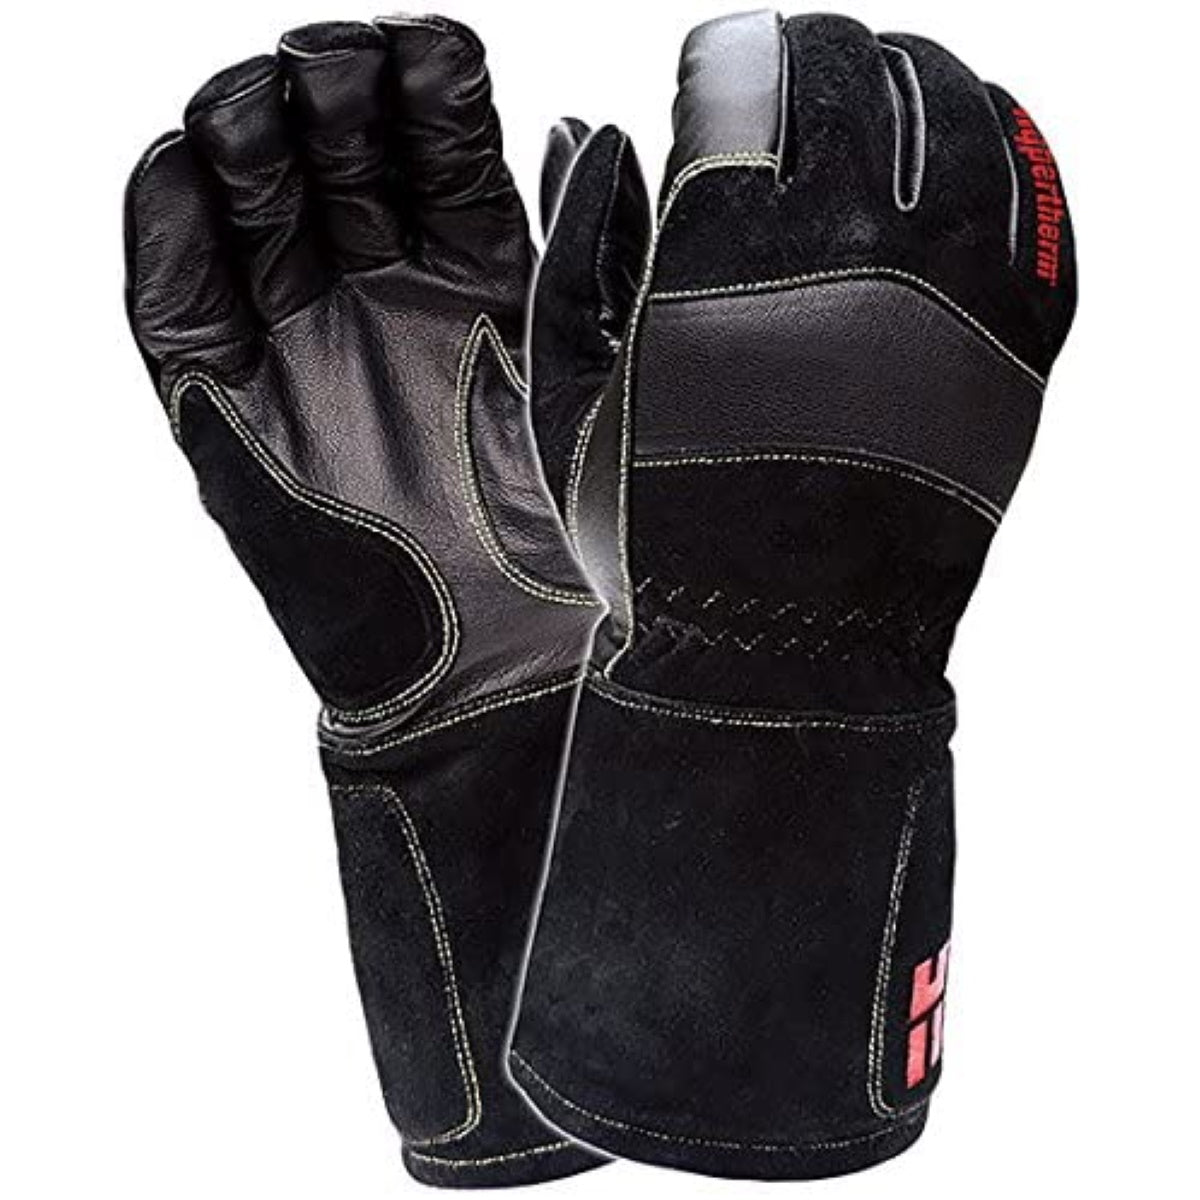 Hypertherm Hyamp Cutting and Gouging Gloves (01702X)